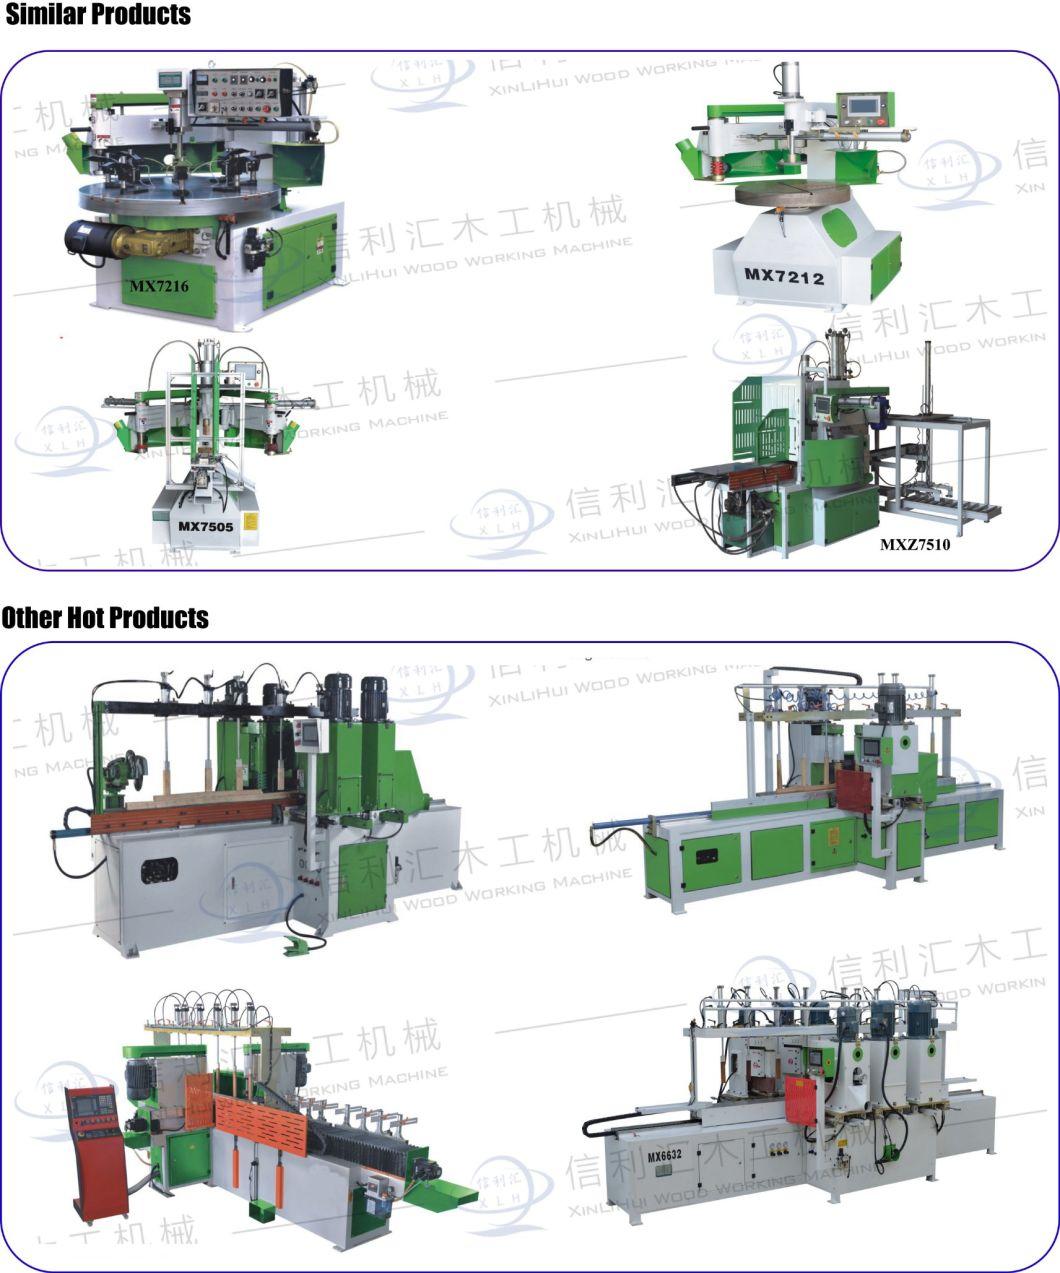 CNC Automatic Double-End Boring Machine Processing and Production of Rectangular Rafts, Round Rafts, Vertical Rafts and Slanting Rafts